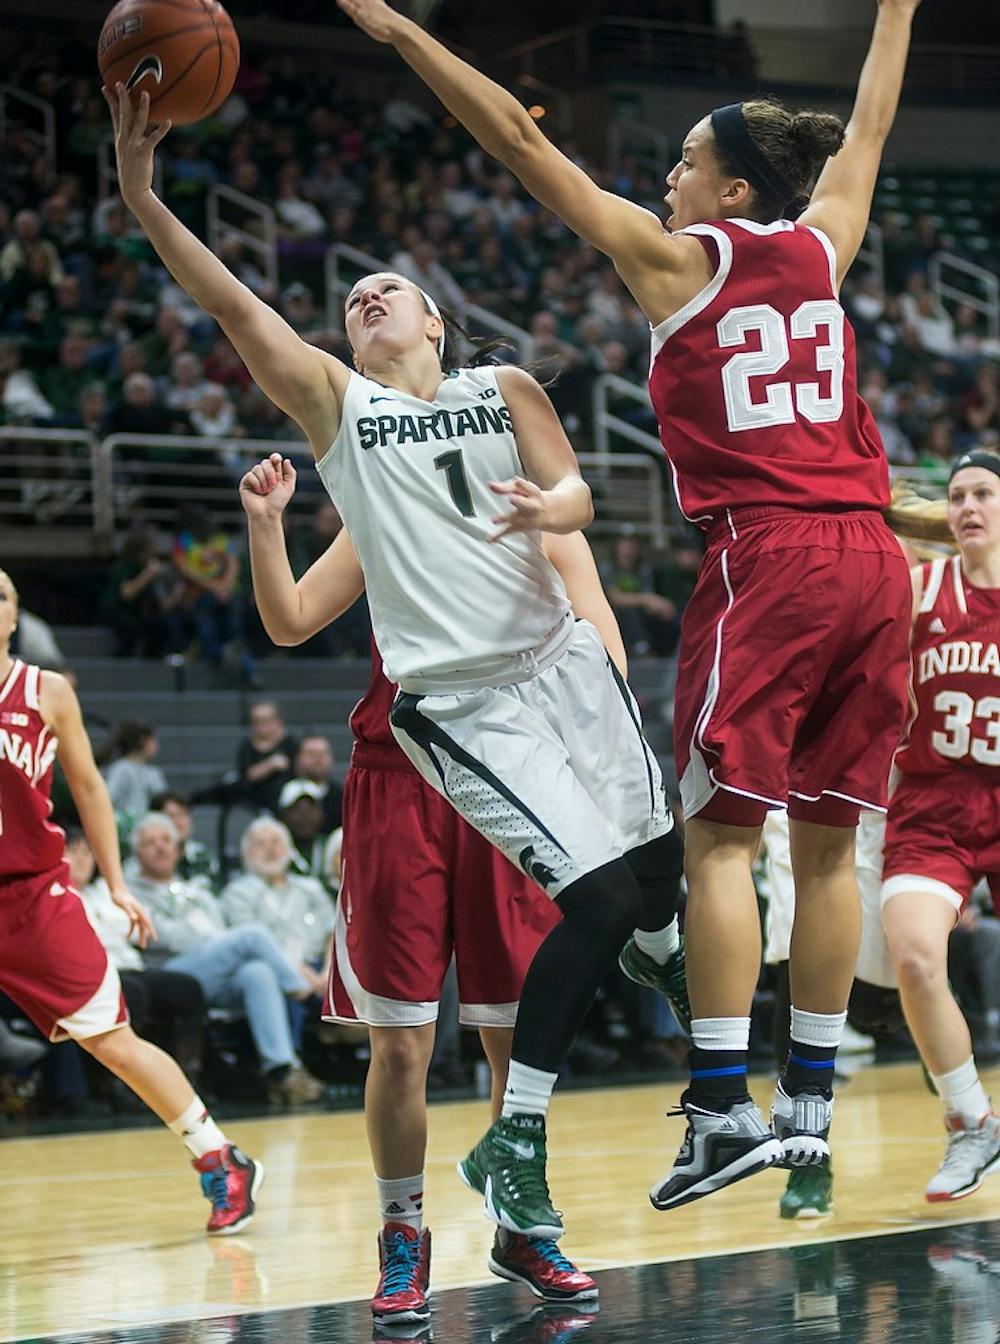 <p>Sophomore guard Tori Jankoska attempts to score Jan. 28, 2015, after getting past Indiana guard Alexis Gassion during the game against Indiana at Breslin Center. The Spartans defeated the Hoosiers, 72-57. Emily Nagle/The State News</p>